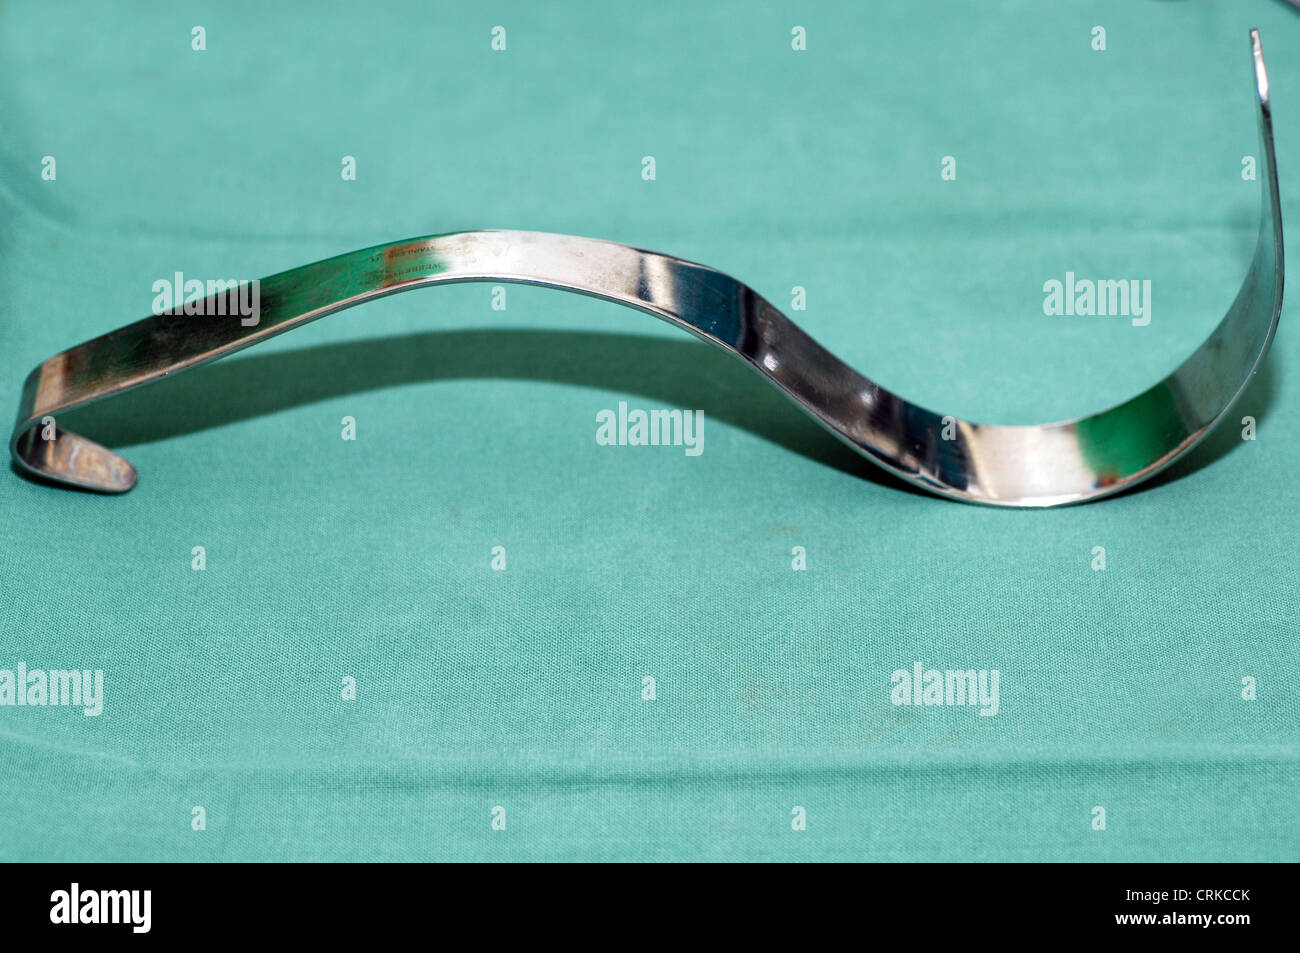 Retractors are surgical instruments for holding tissues away from the field of operation. Stock Photo